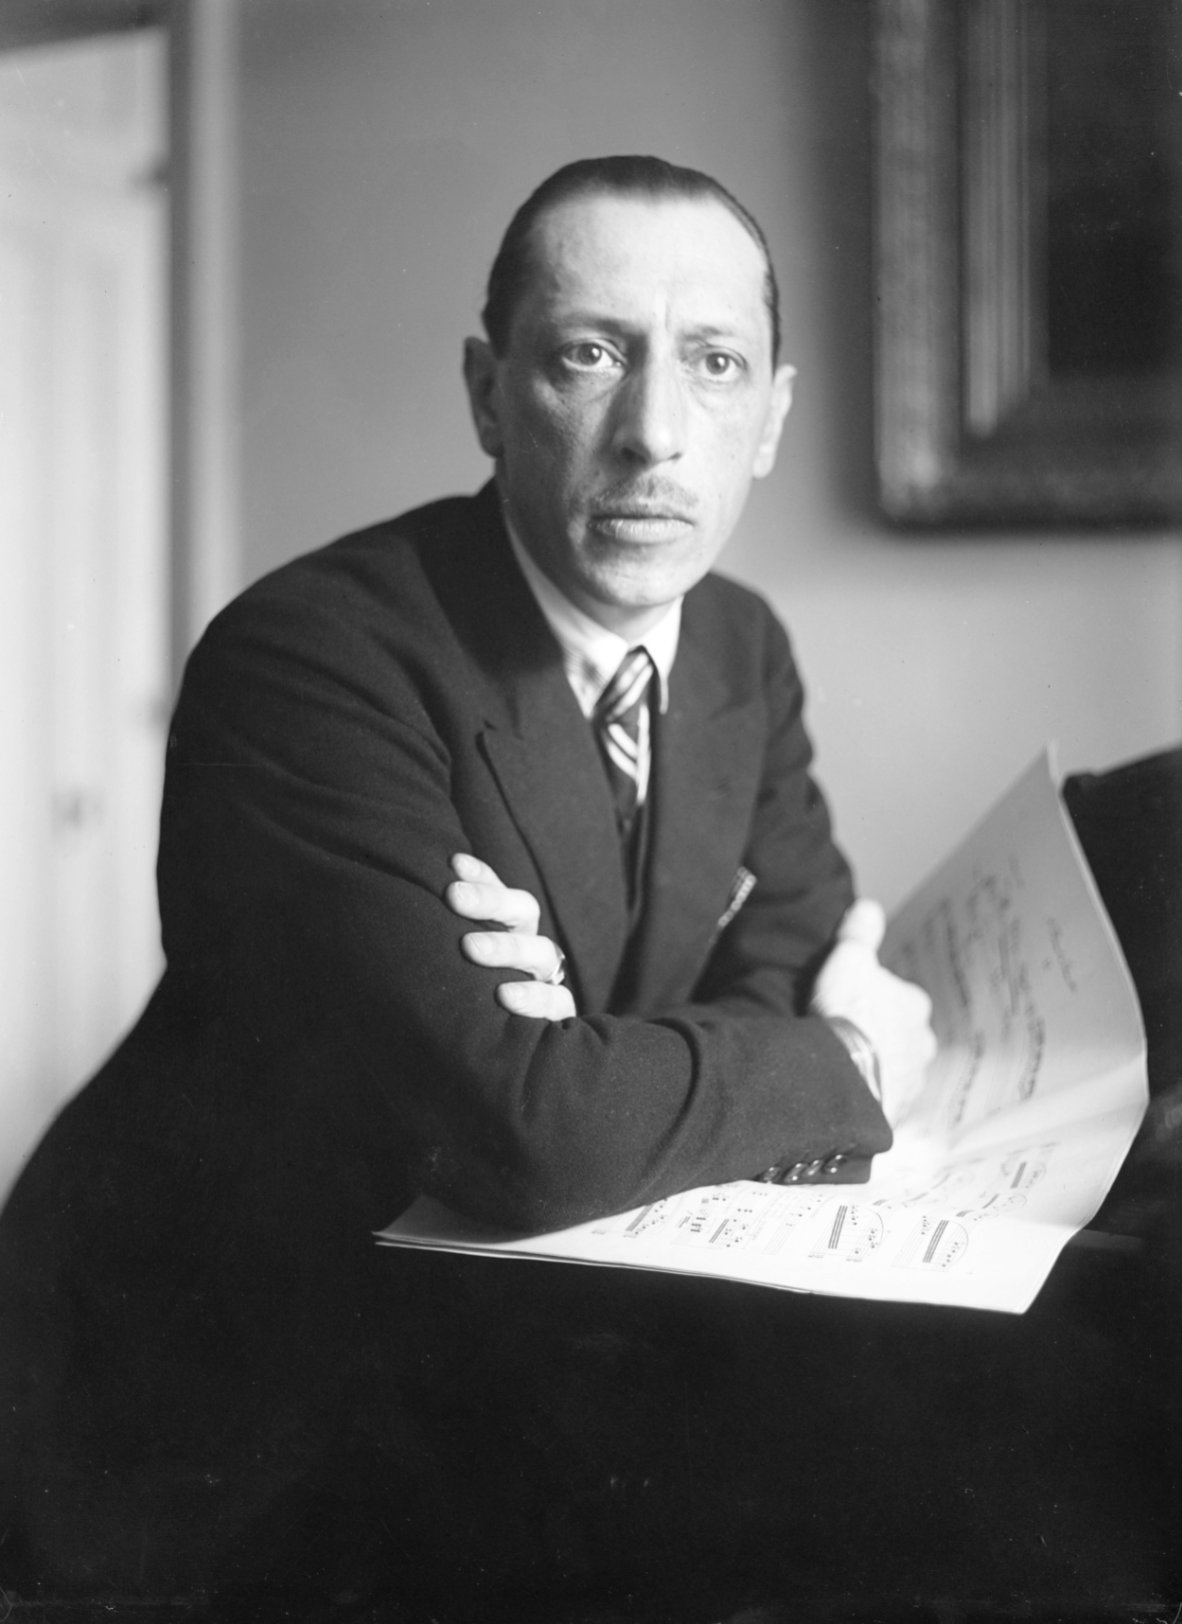 Igor Stravinsky, 1920s (Photo from the George Grantham Bain collection at the Library of Congress).